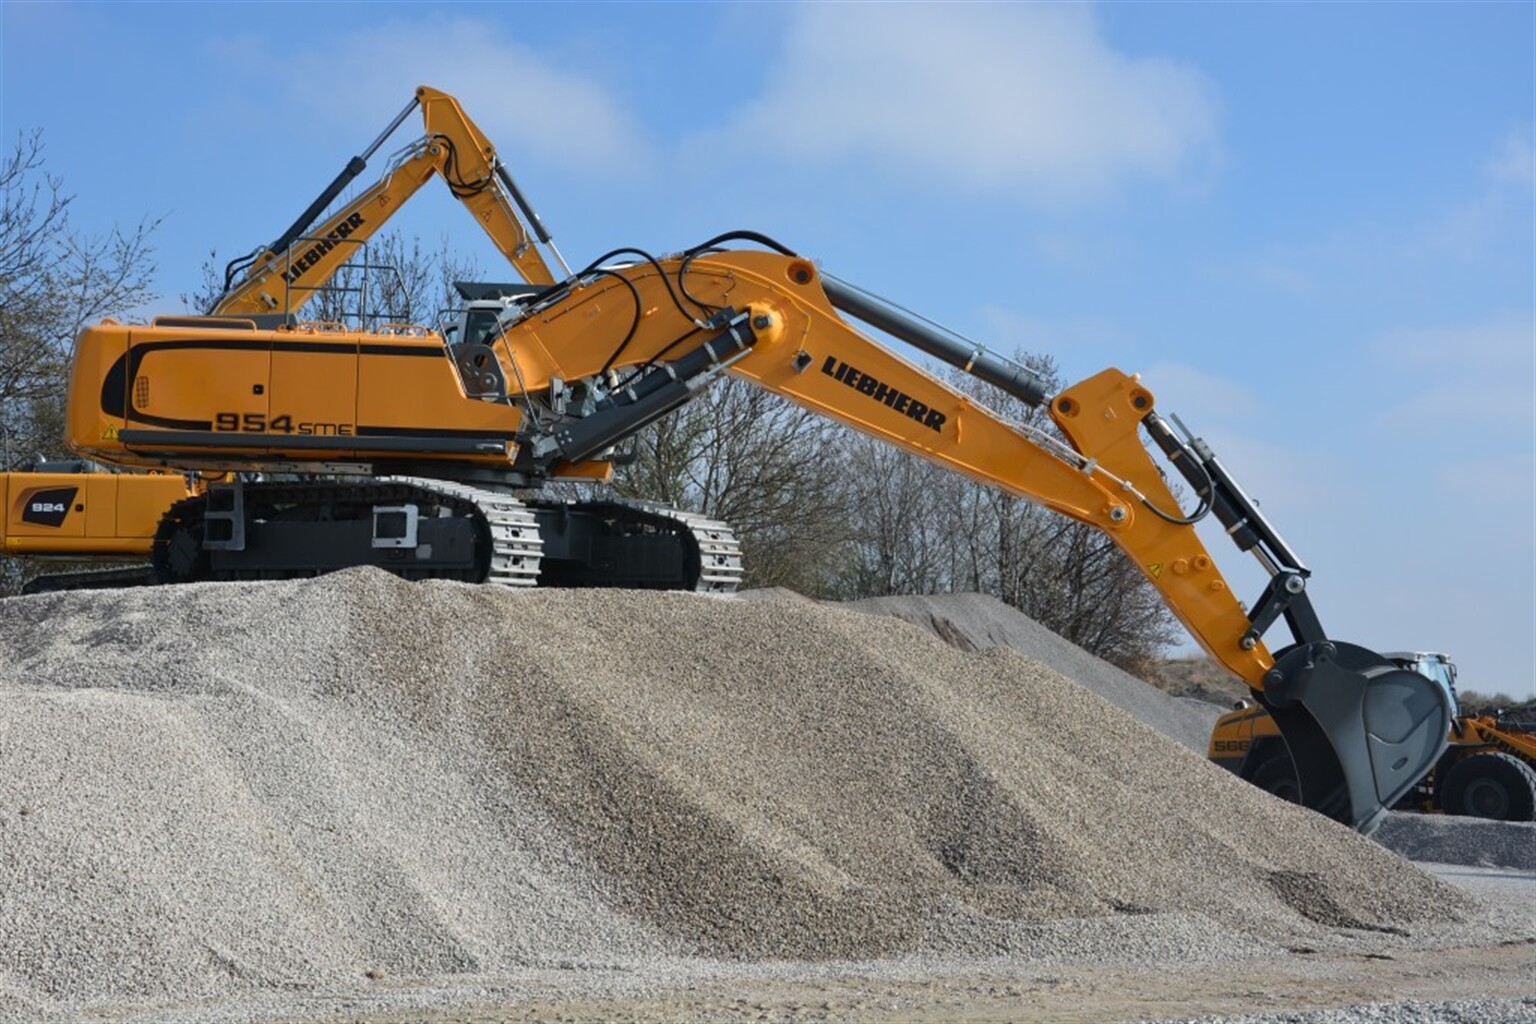 Liebherr demonstrates machines for less regulated markets